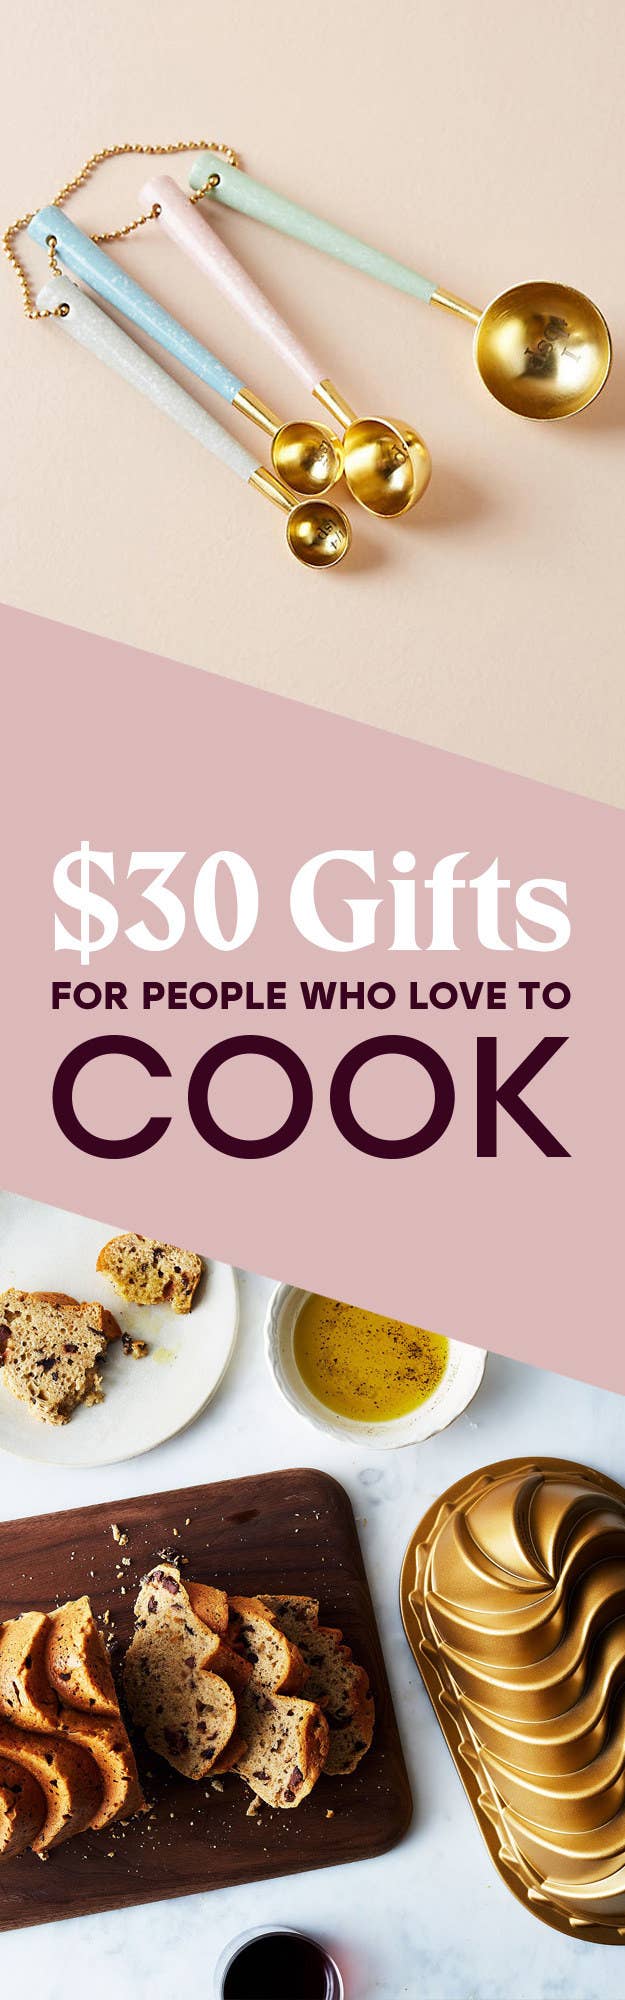 27 Game-Changing Gifts For Chefs Guaranteed To Really Fire